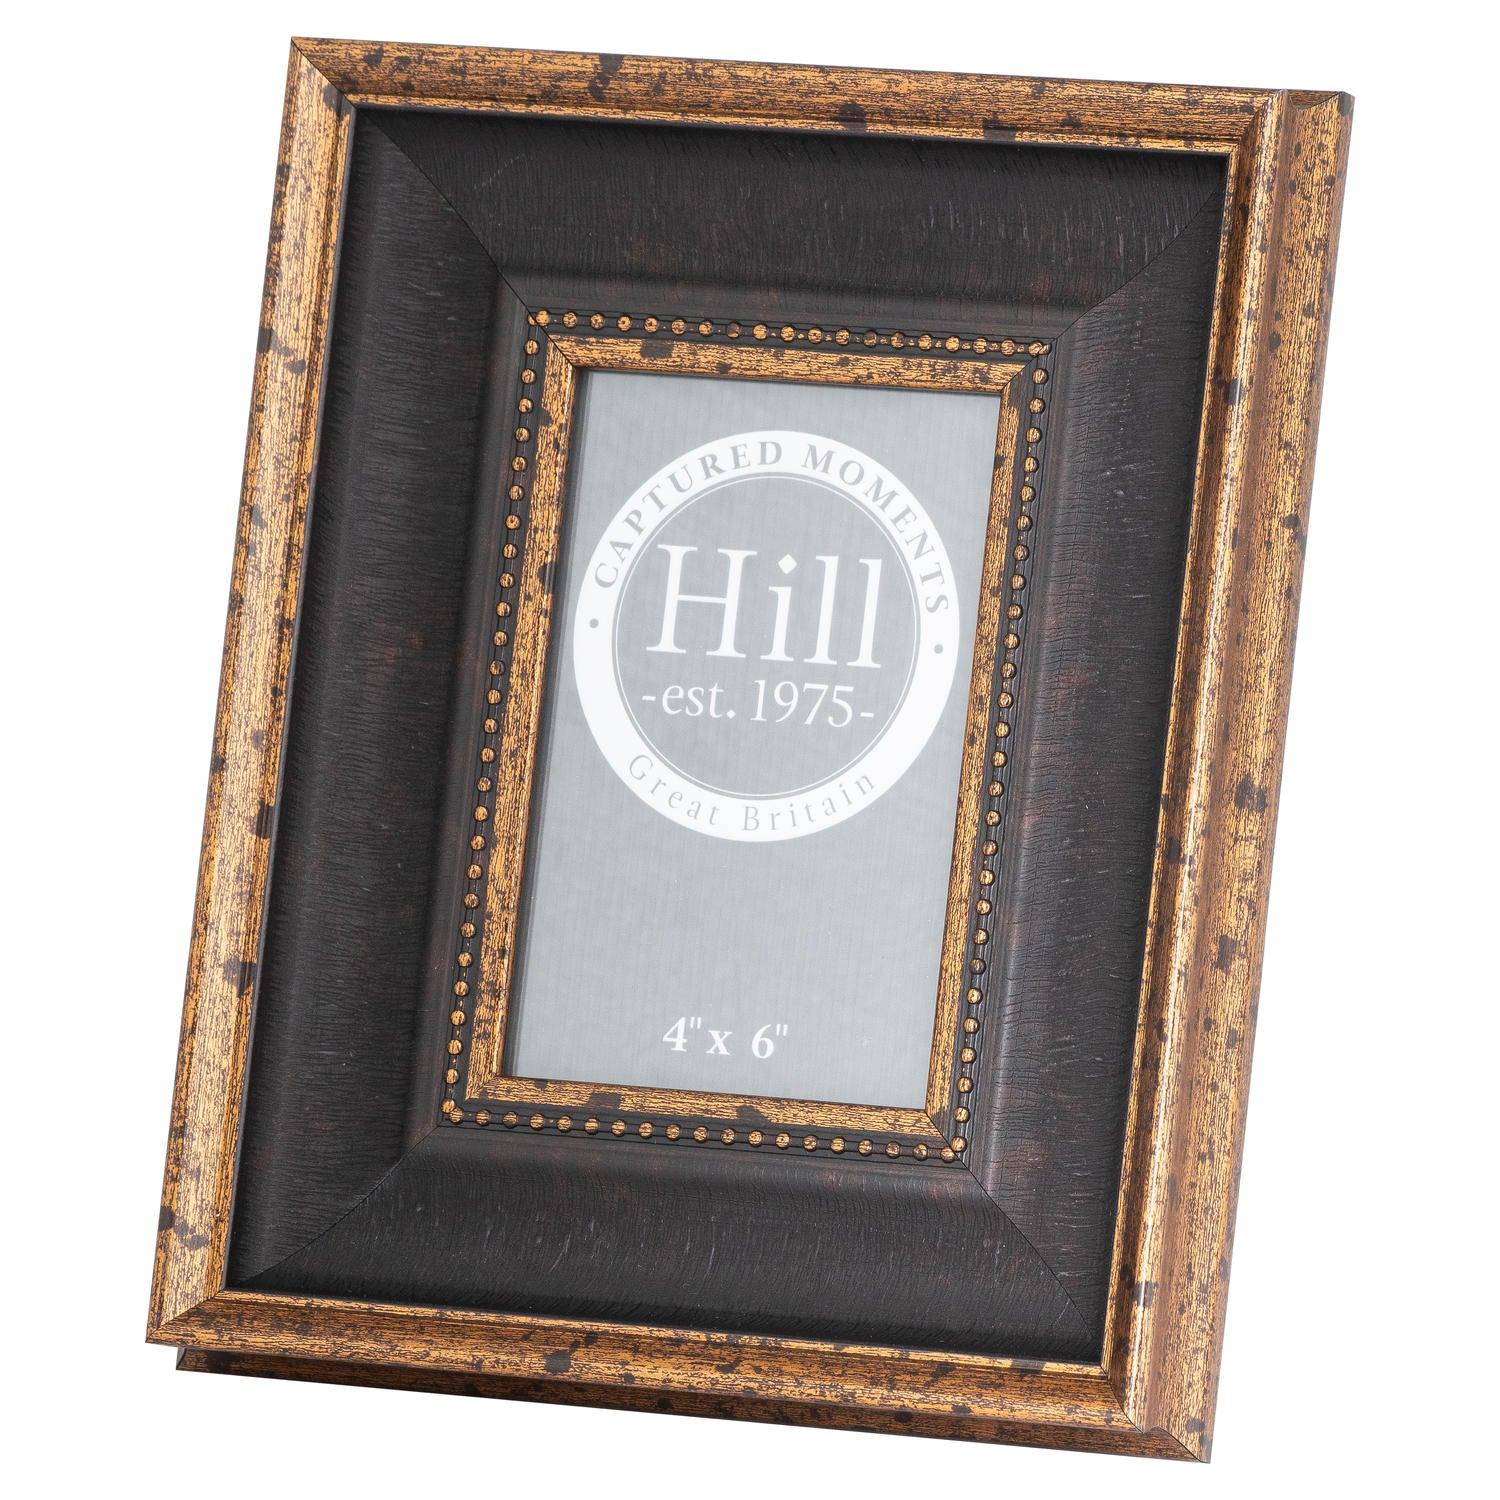 View Black Antique Gold Beaded 4X6 Photo Frame information